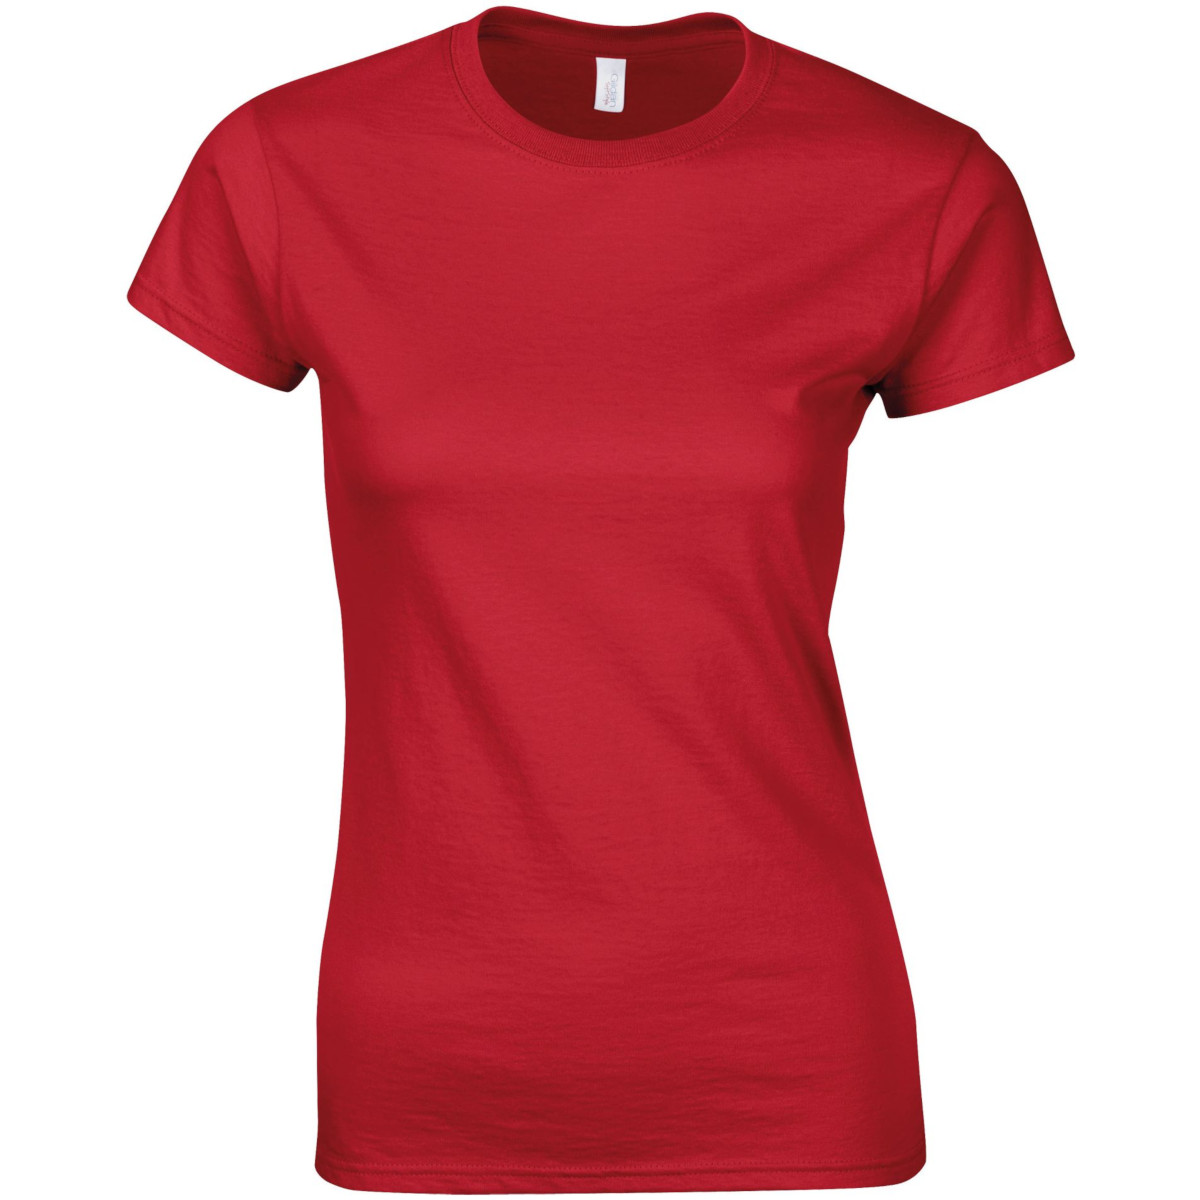 Gildan SoftStyle Ladies Fitted Ringspun T-Shirt